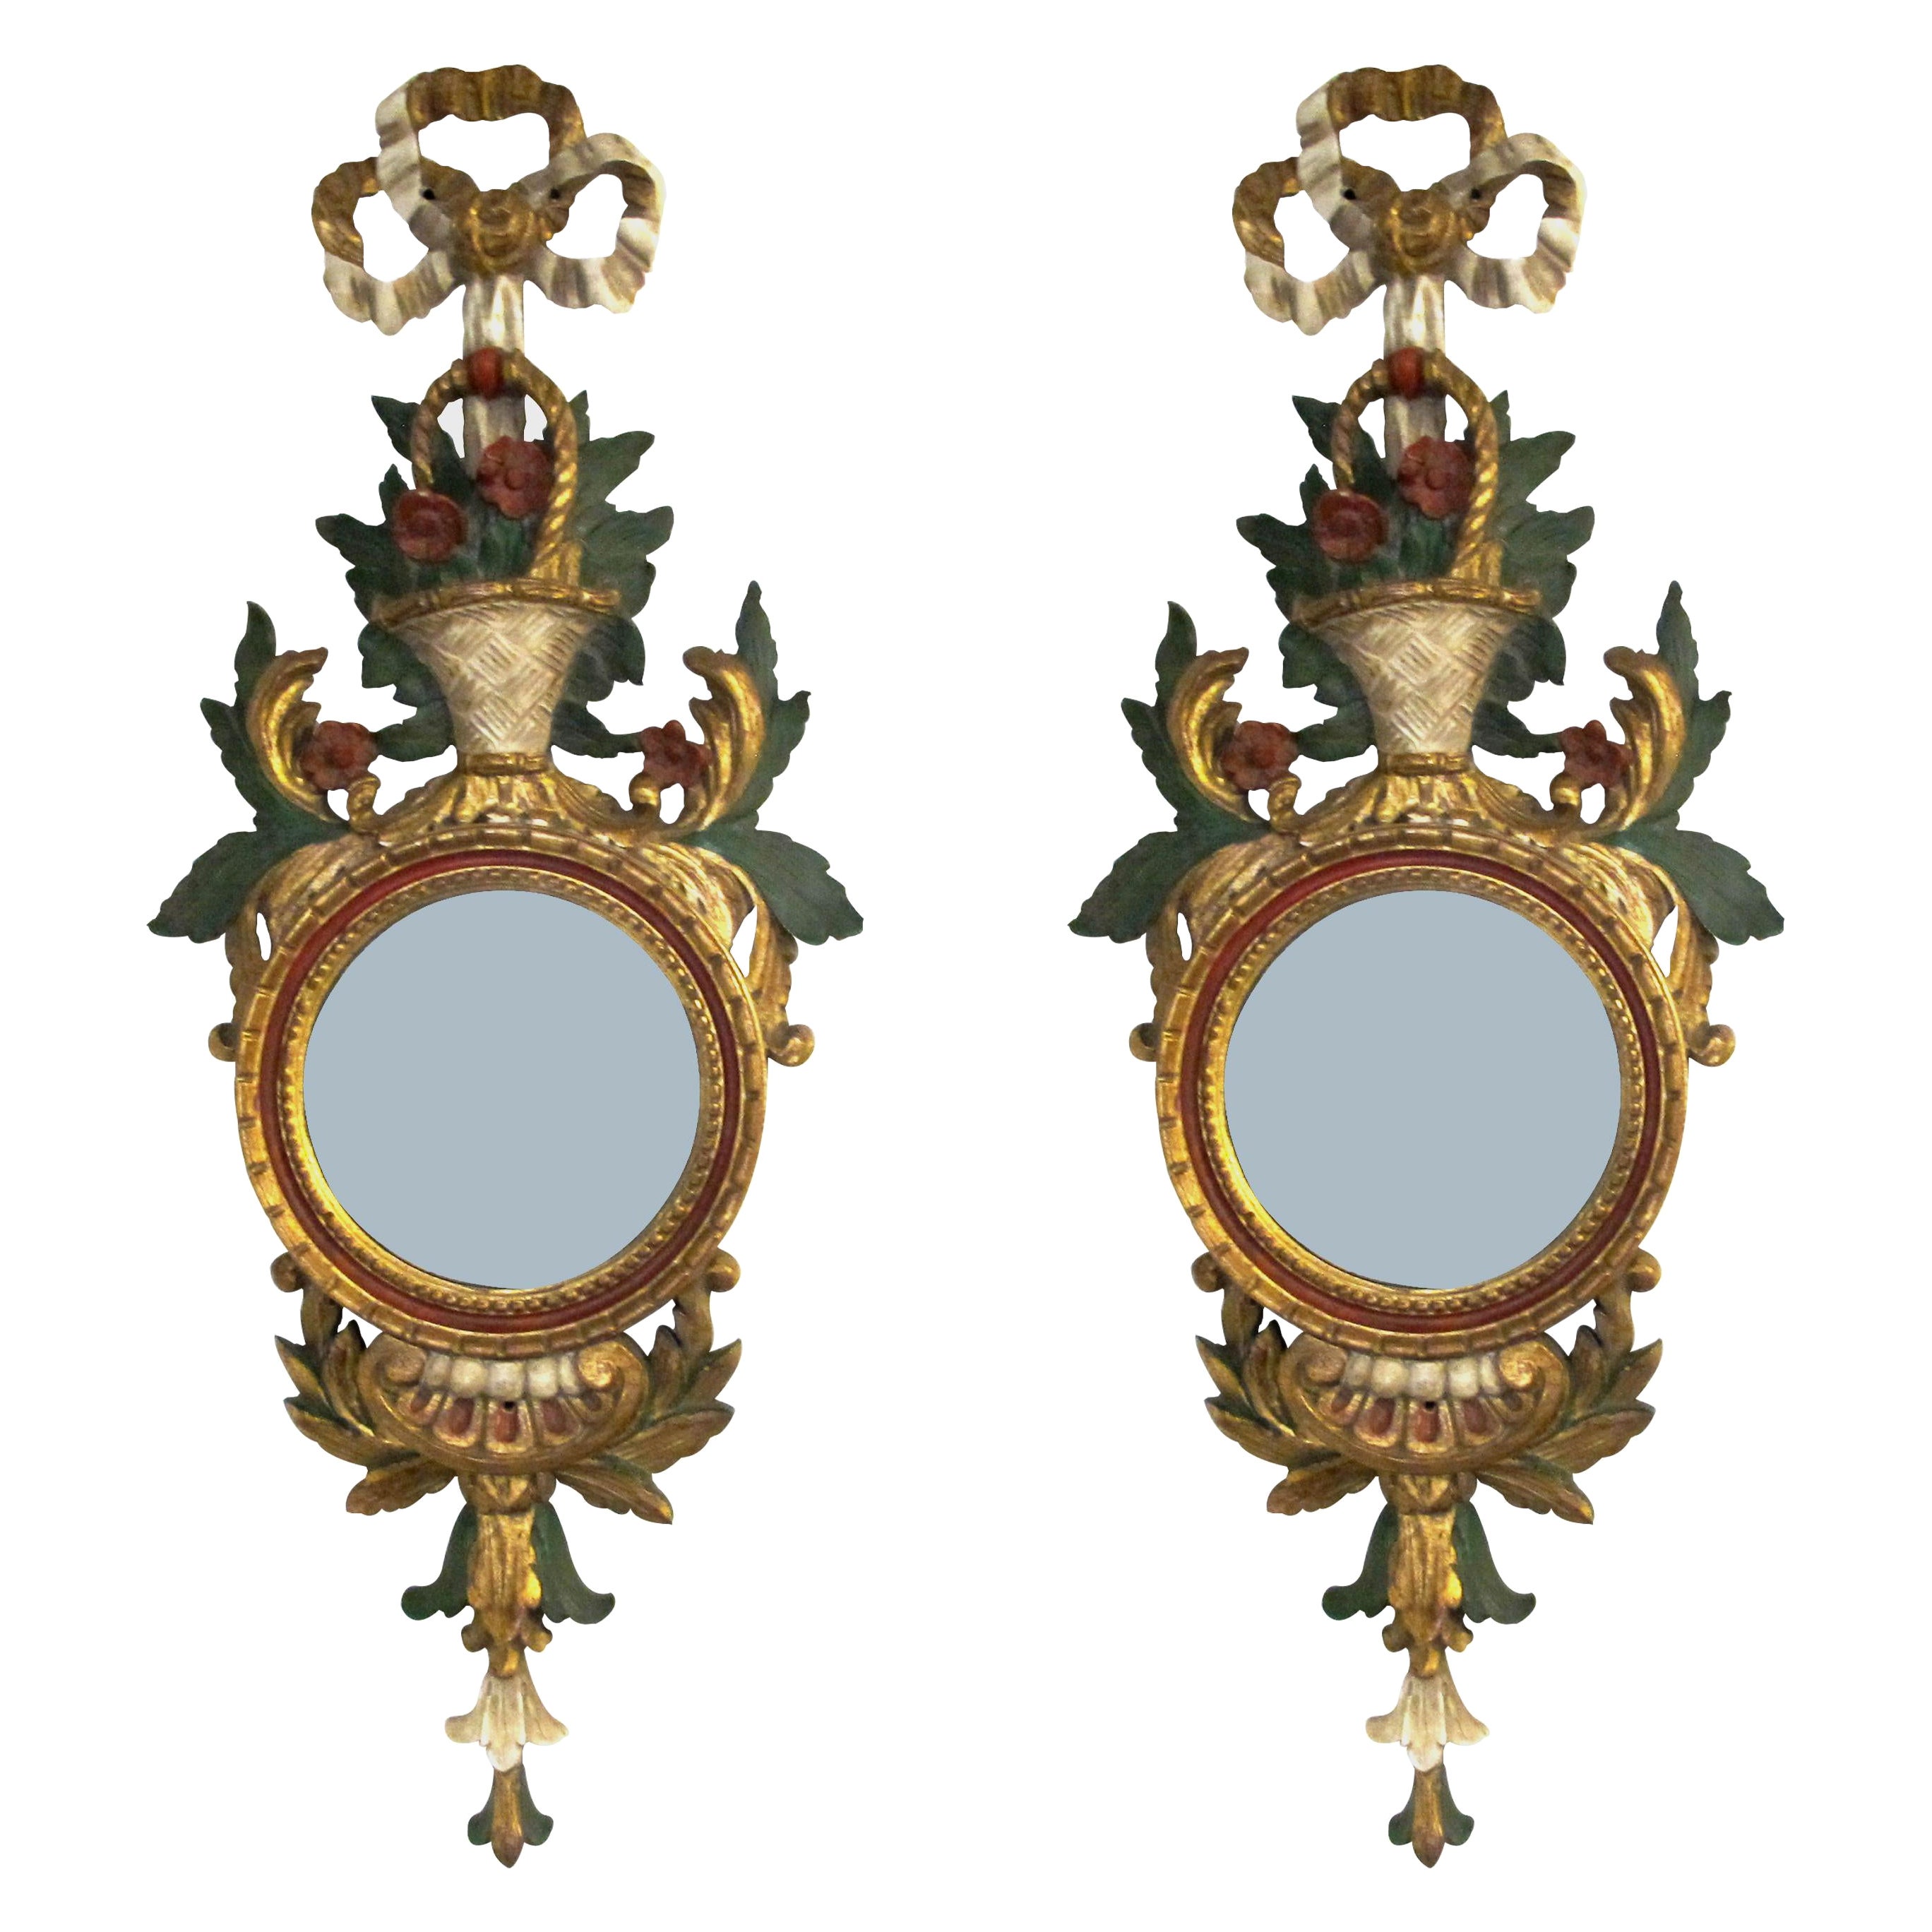 Pair of 1950s Decorative Italian Firenze Giltwood Convex Mirrored Wall Sconces